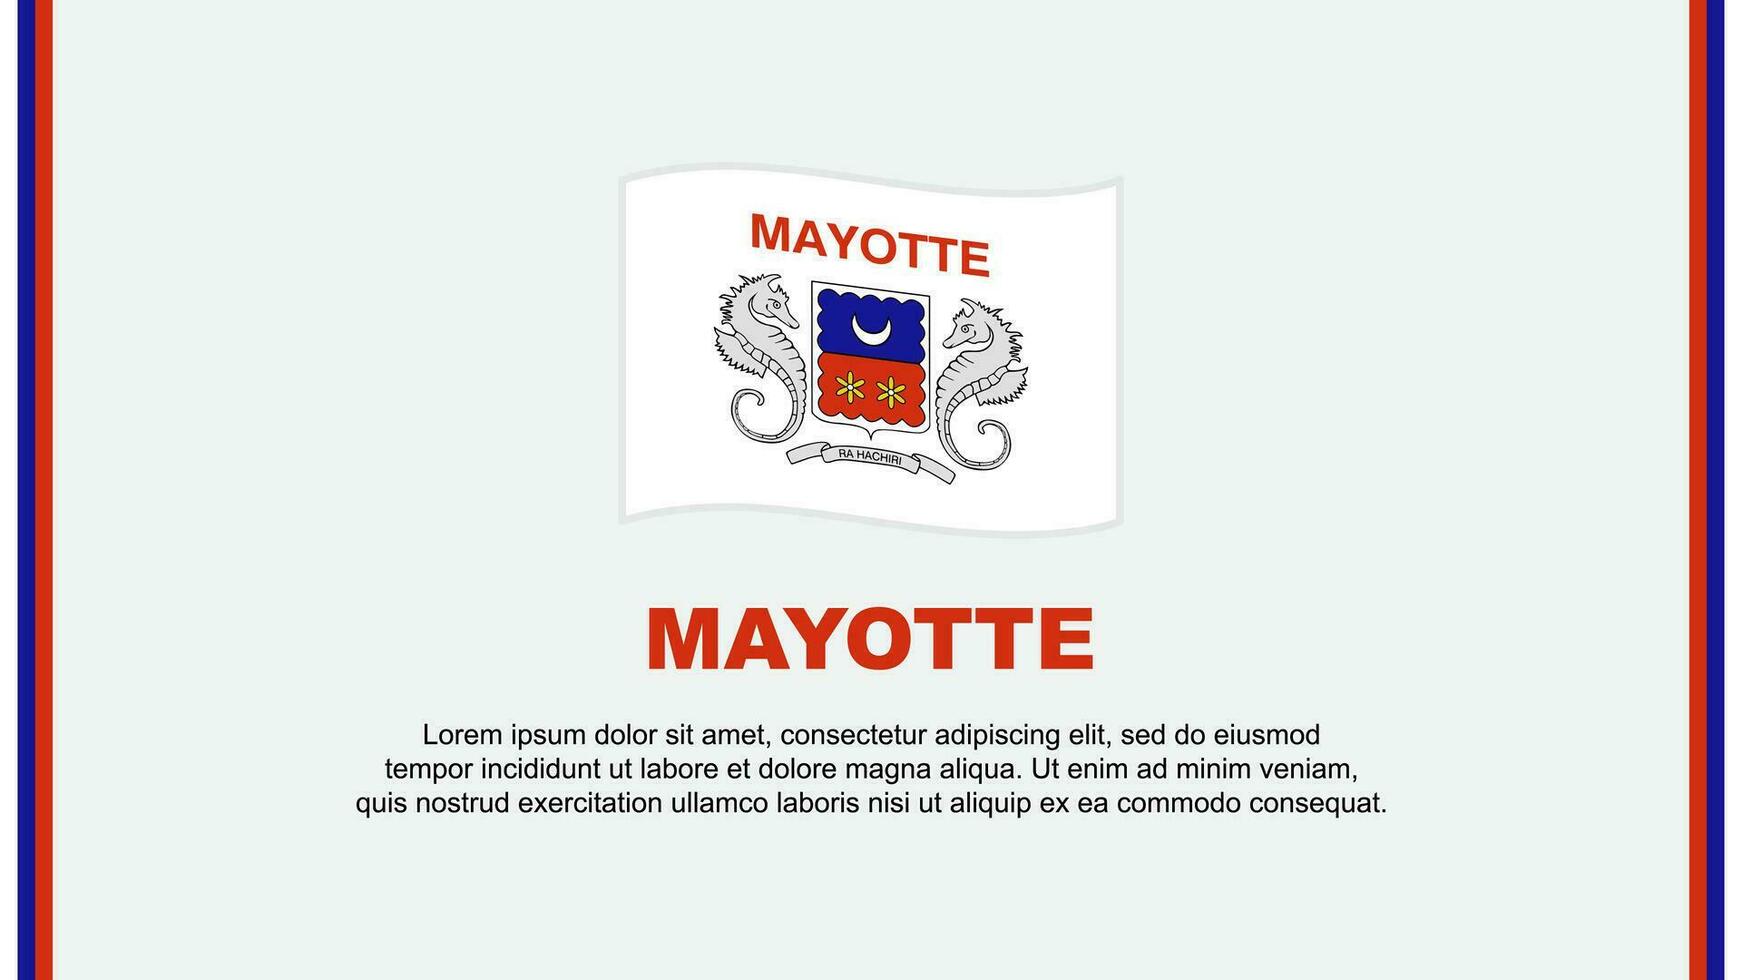 Mayotte Flag Abstract Background Design Template. Mayotte Cartoon